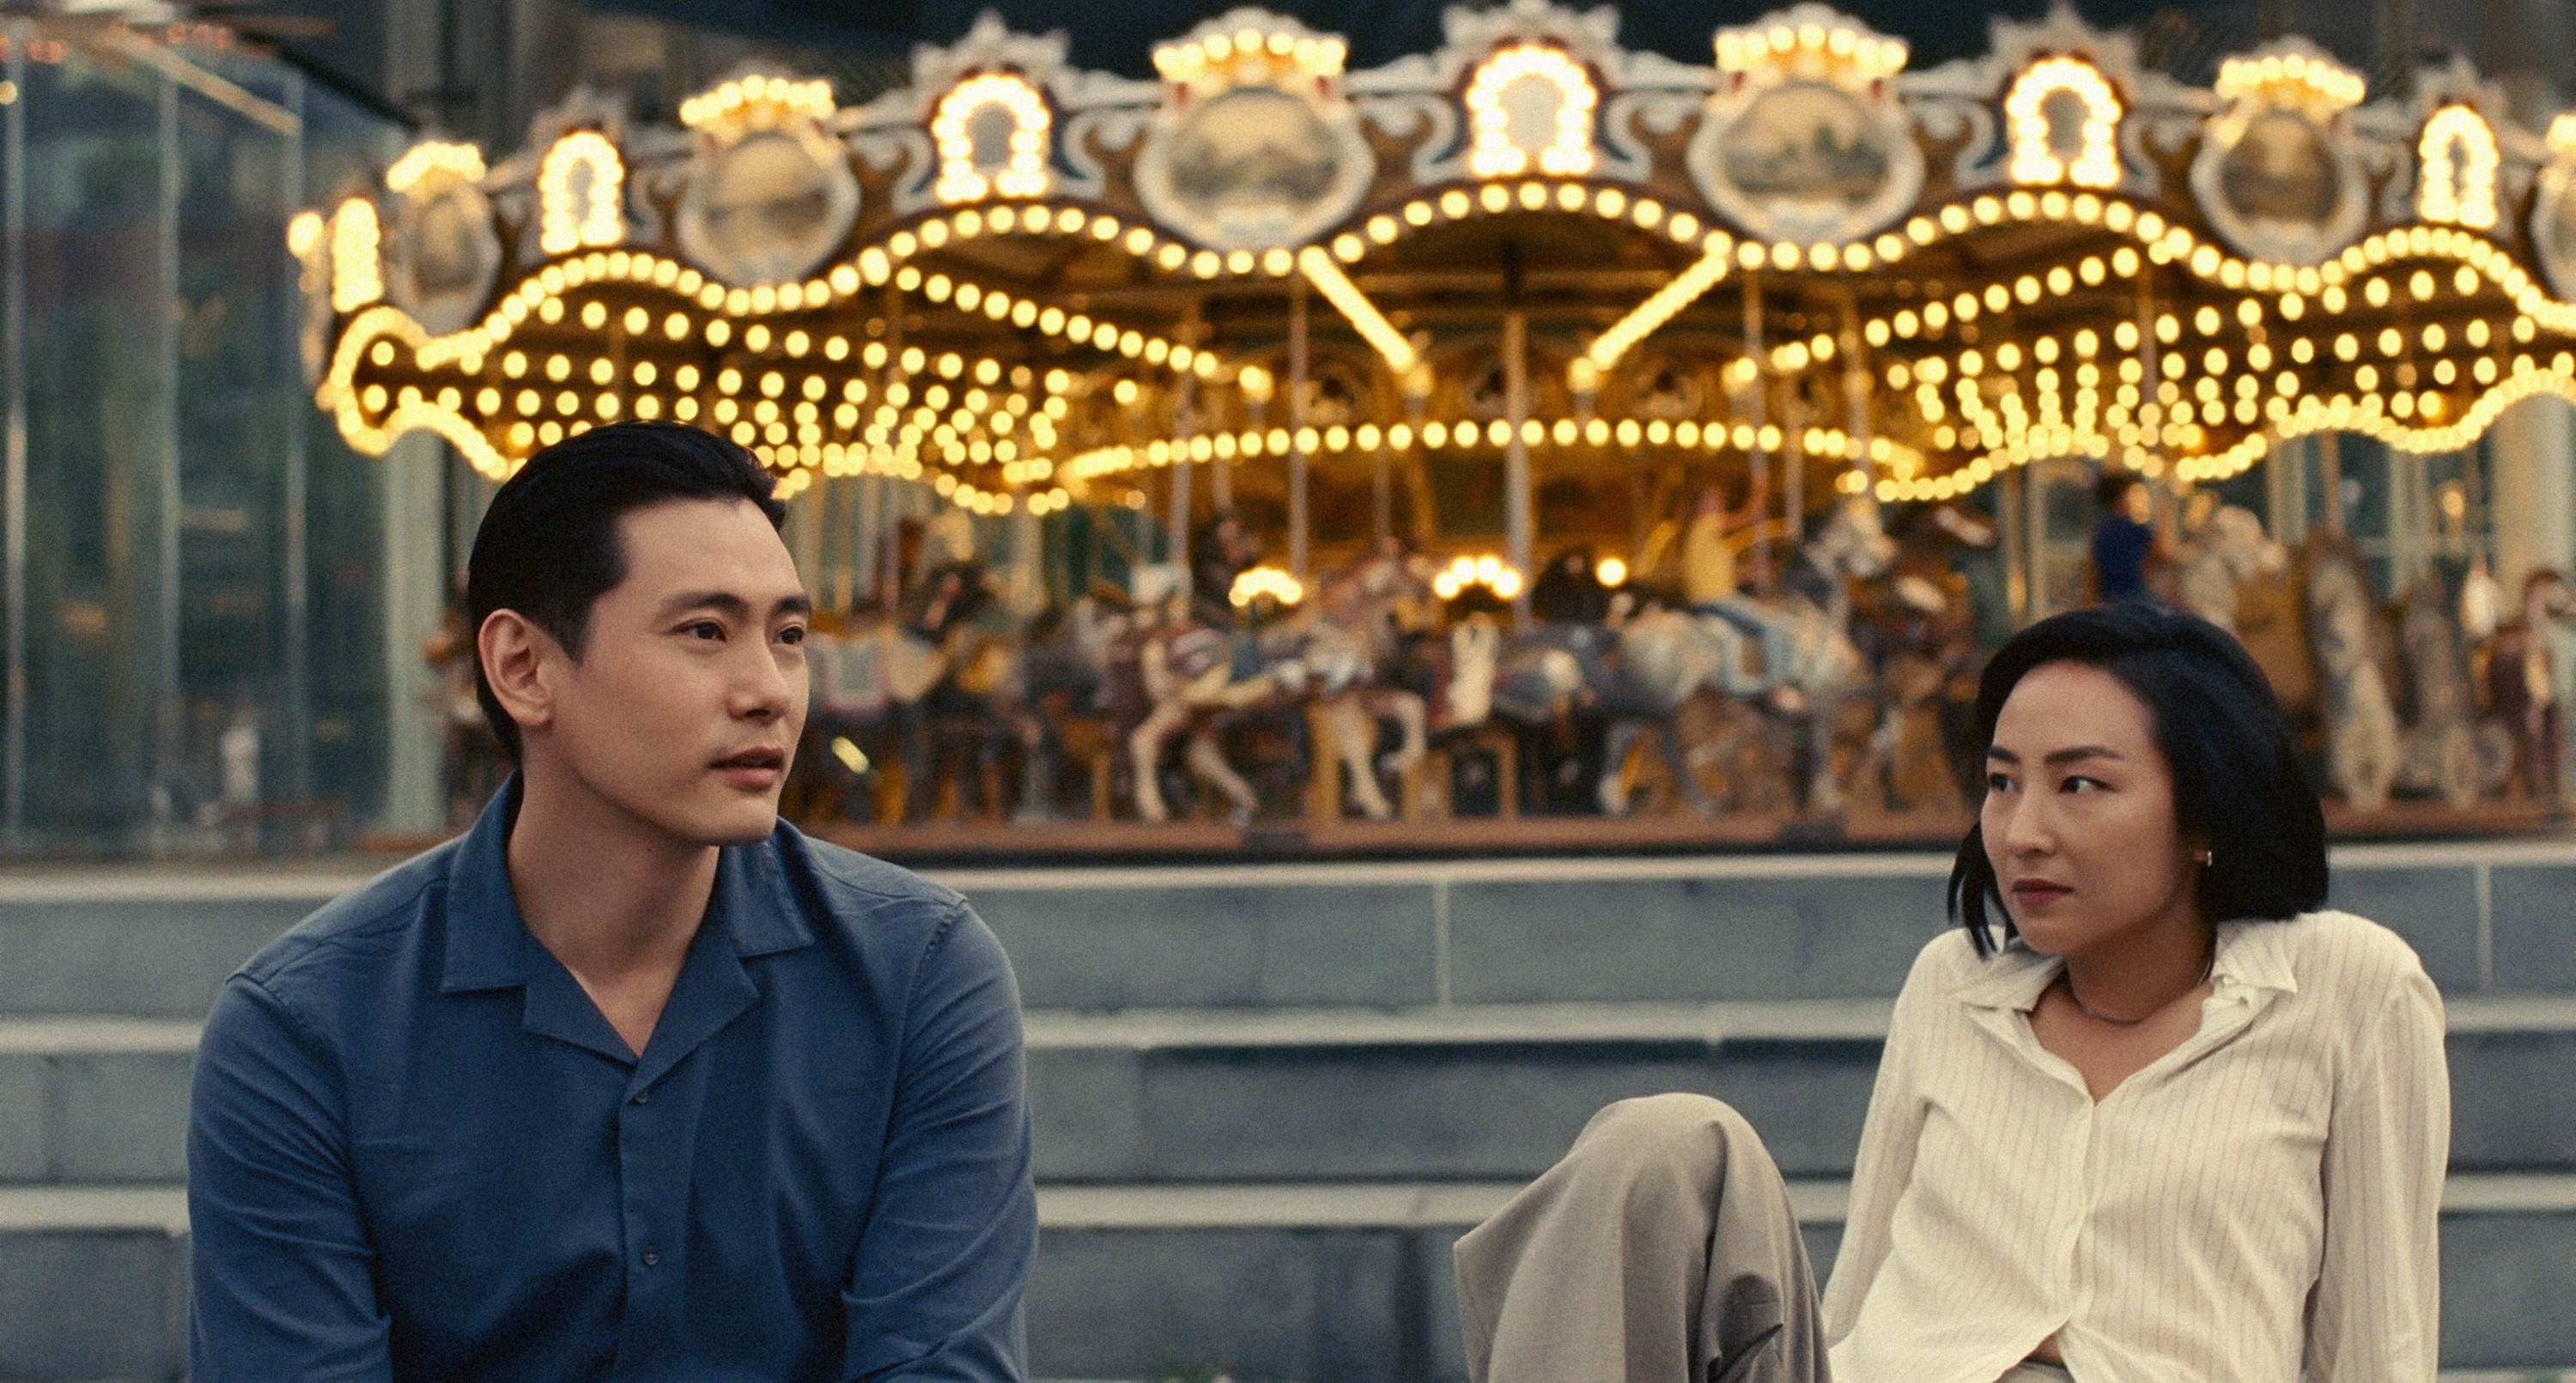 characters sitting outside a carousel